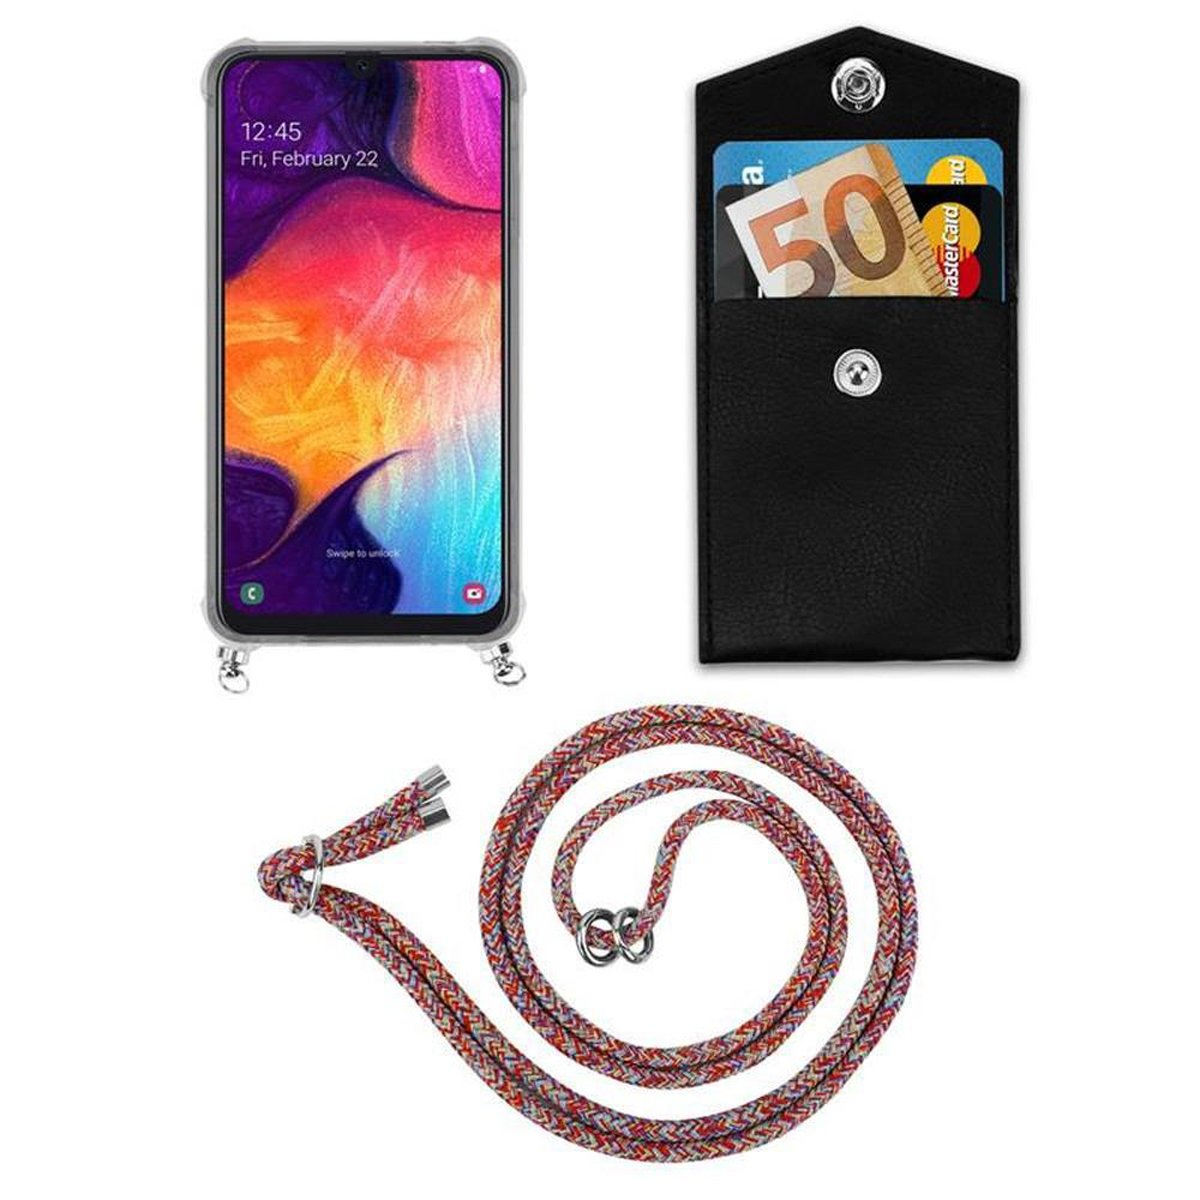 Handy Hülle, Ringen, Band mit A50s A30s, Backcover, Silber PARROT CADORABO Kette 4G Samsung, / abnehmbarer A50 und Galaxy COLORFUL / Kordel